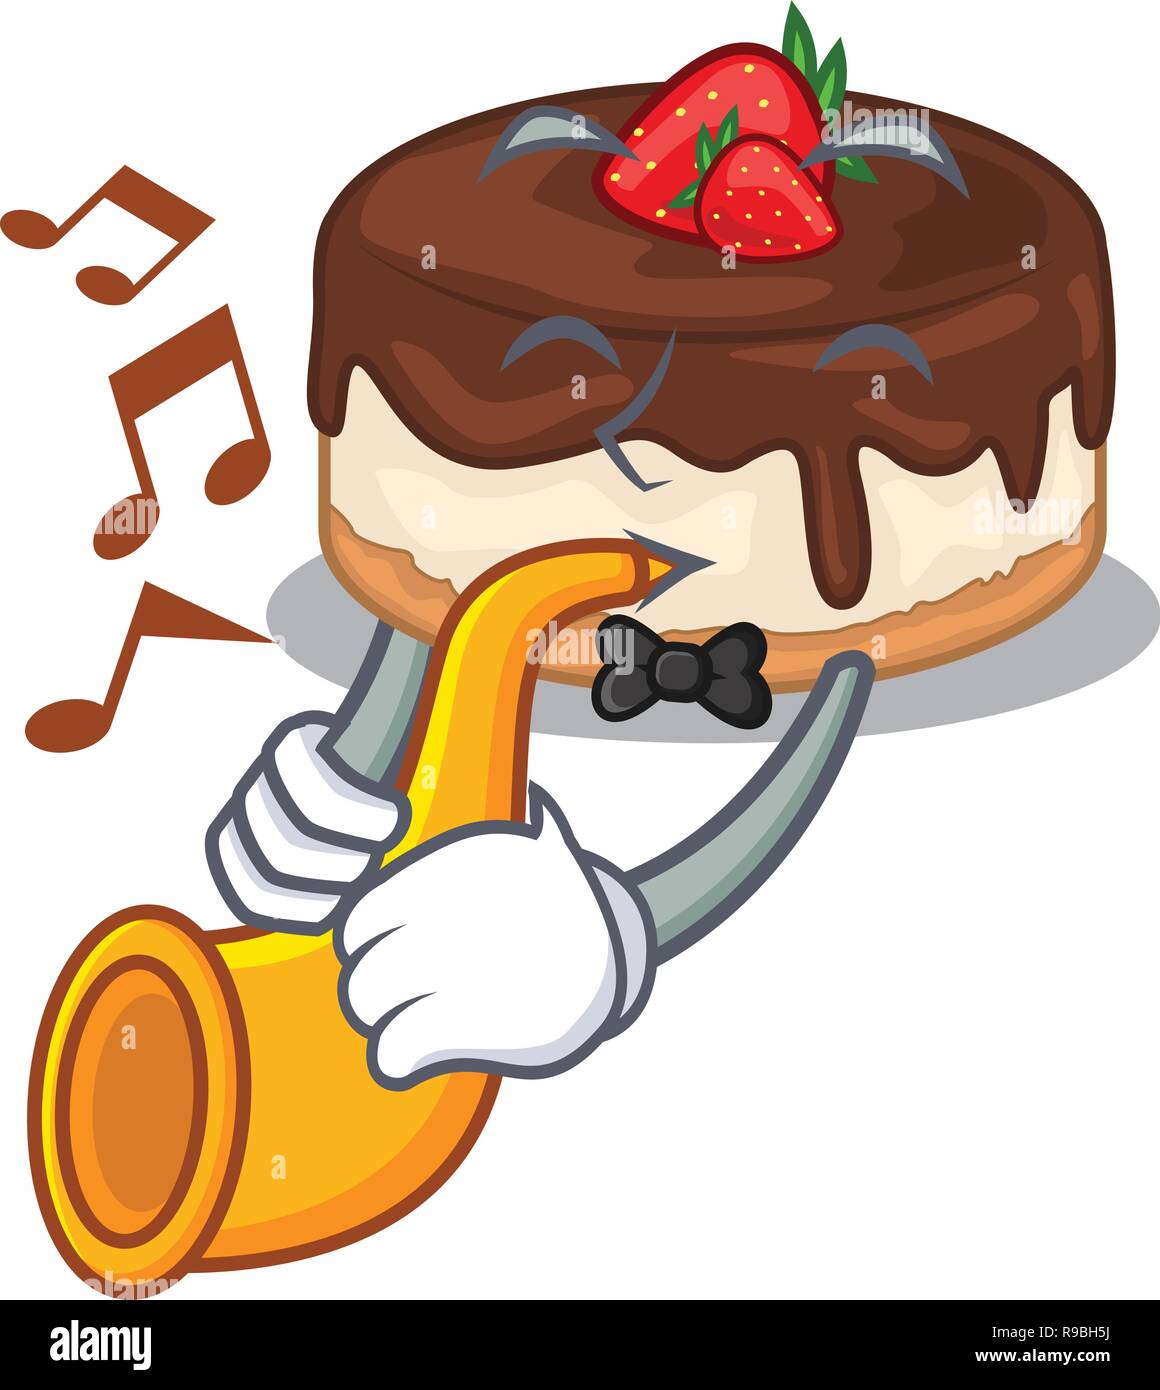 With trumpet berries cartoon cake on above table Stock Vector